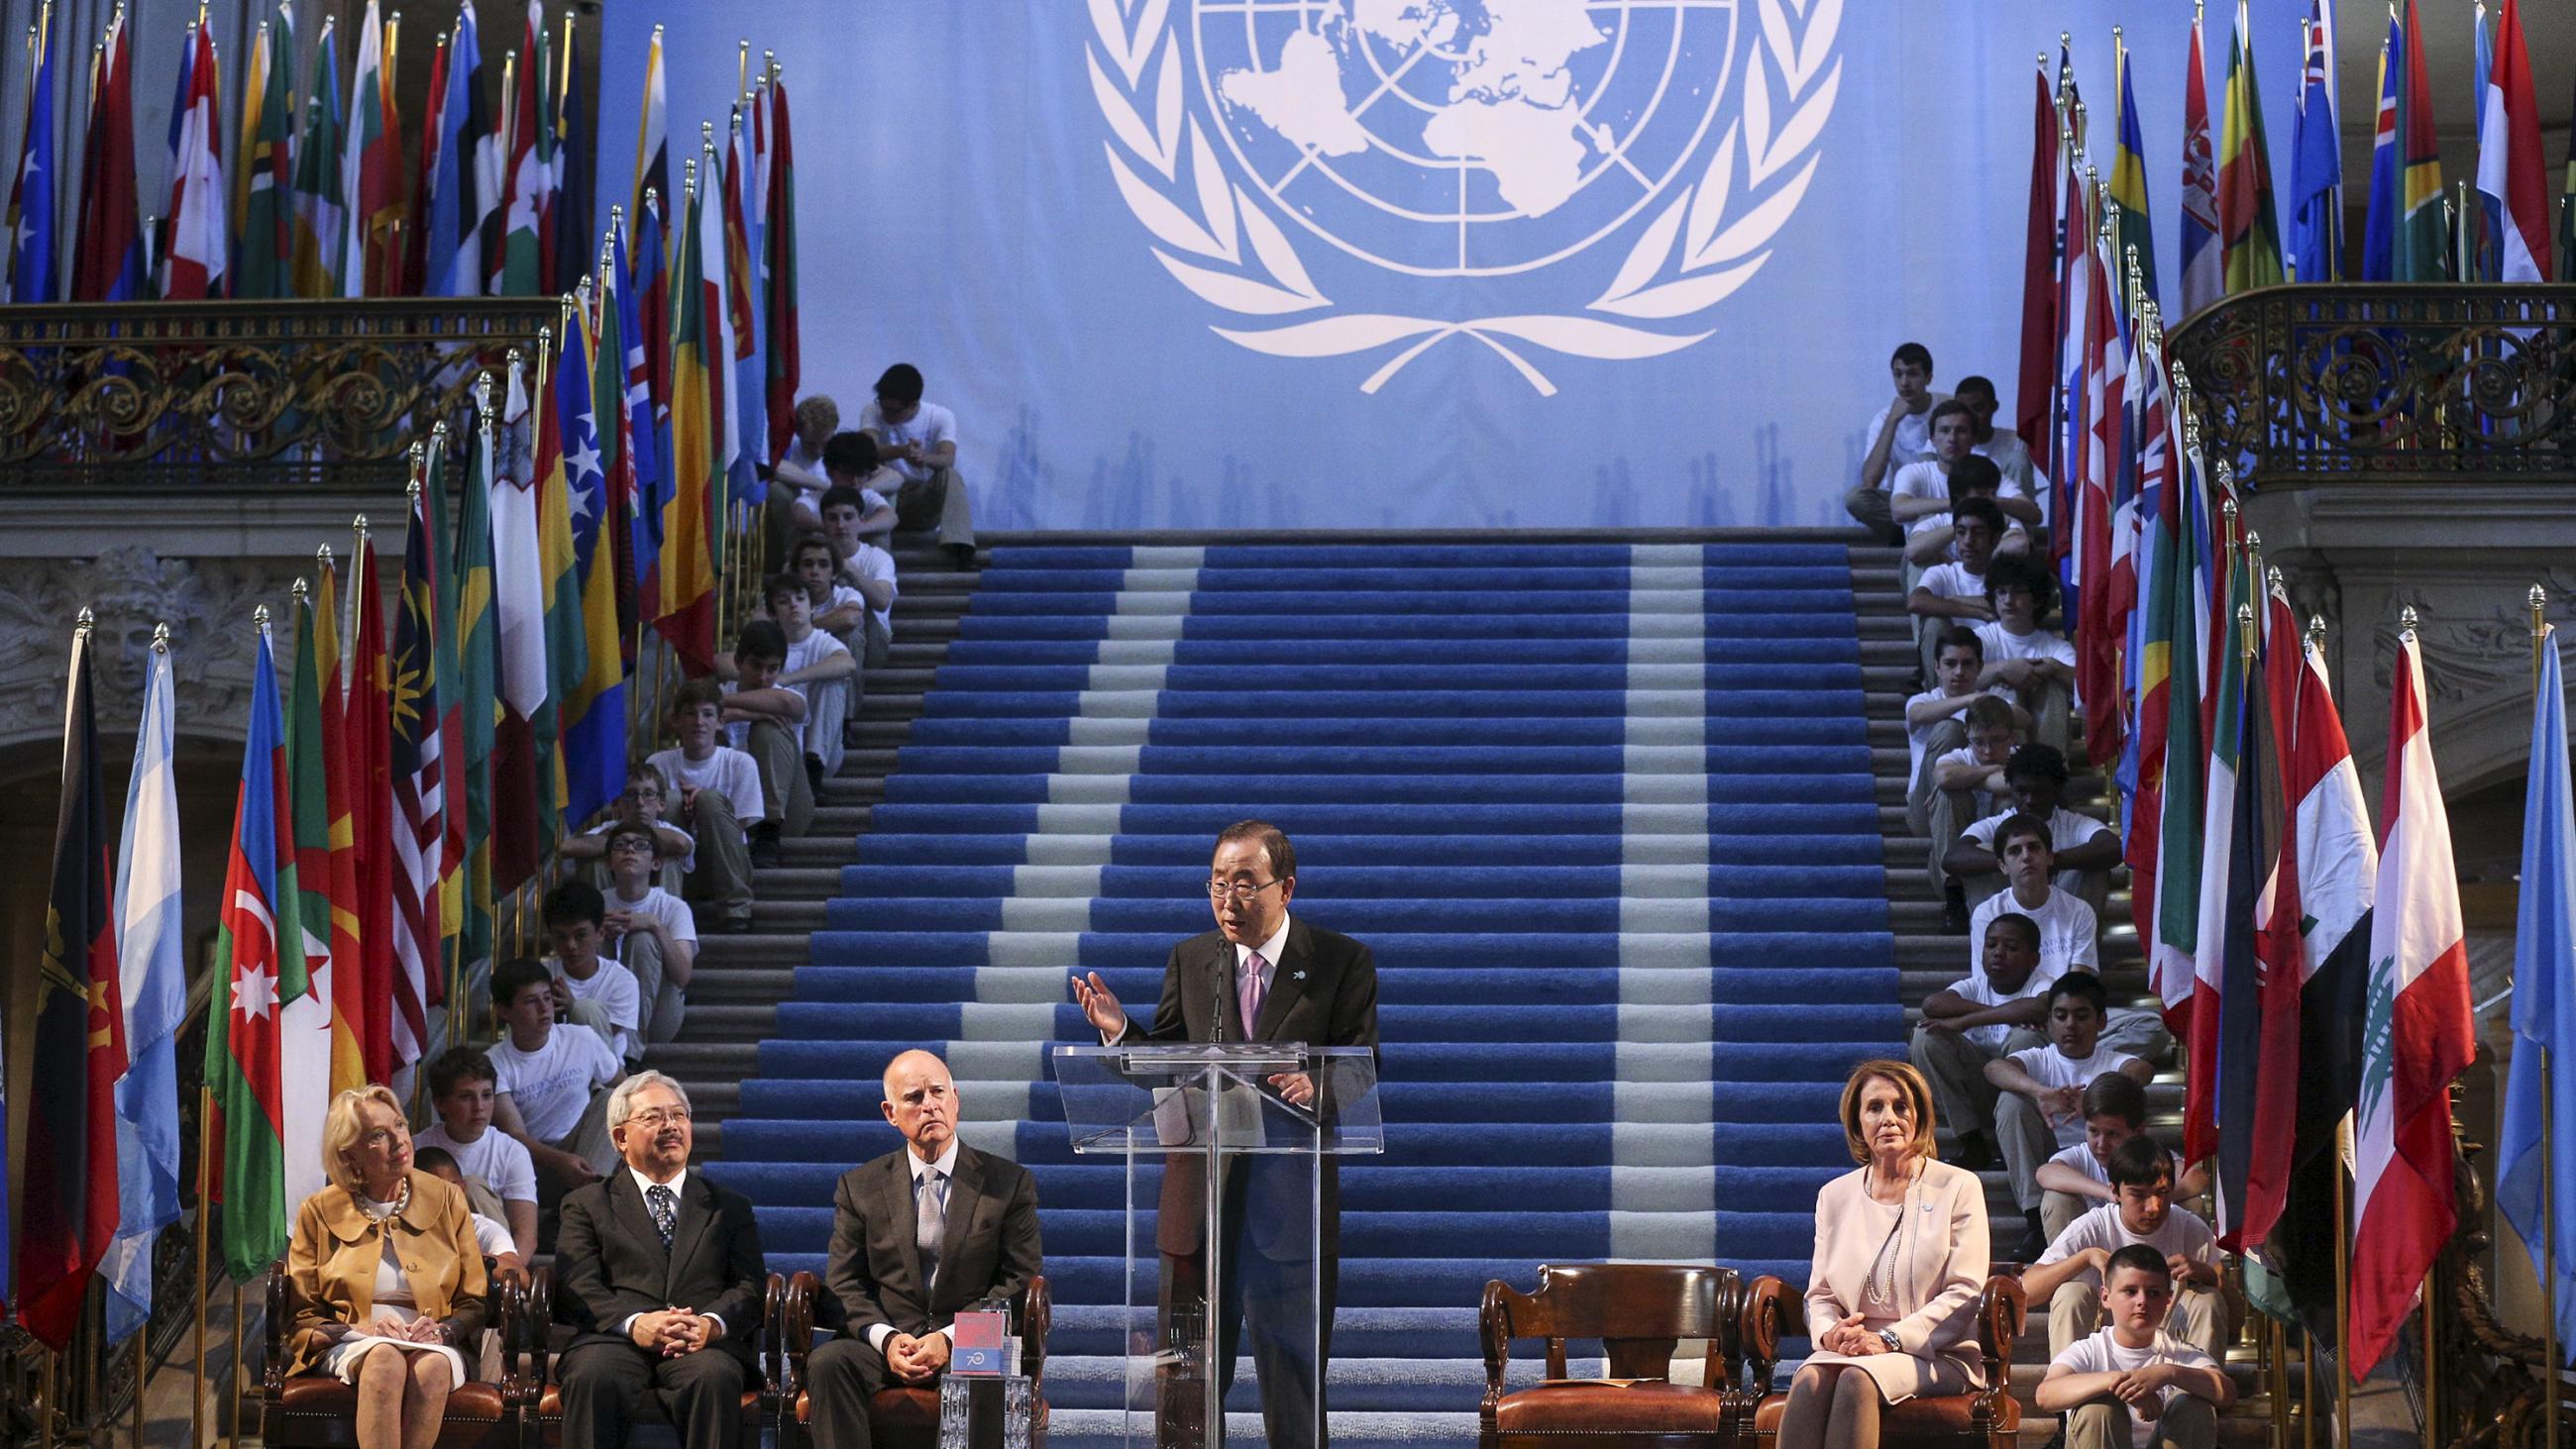 The photo shows the former UN Secretary-General at a podium on an elaborately designed stage with steps leading up and children dressed in white shirts and tan slacks on either sides of the stairs. 